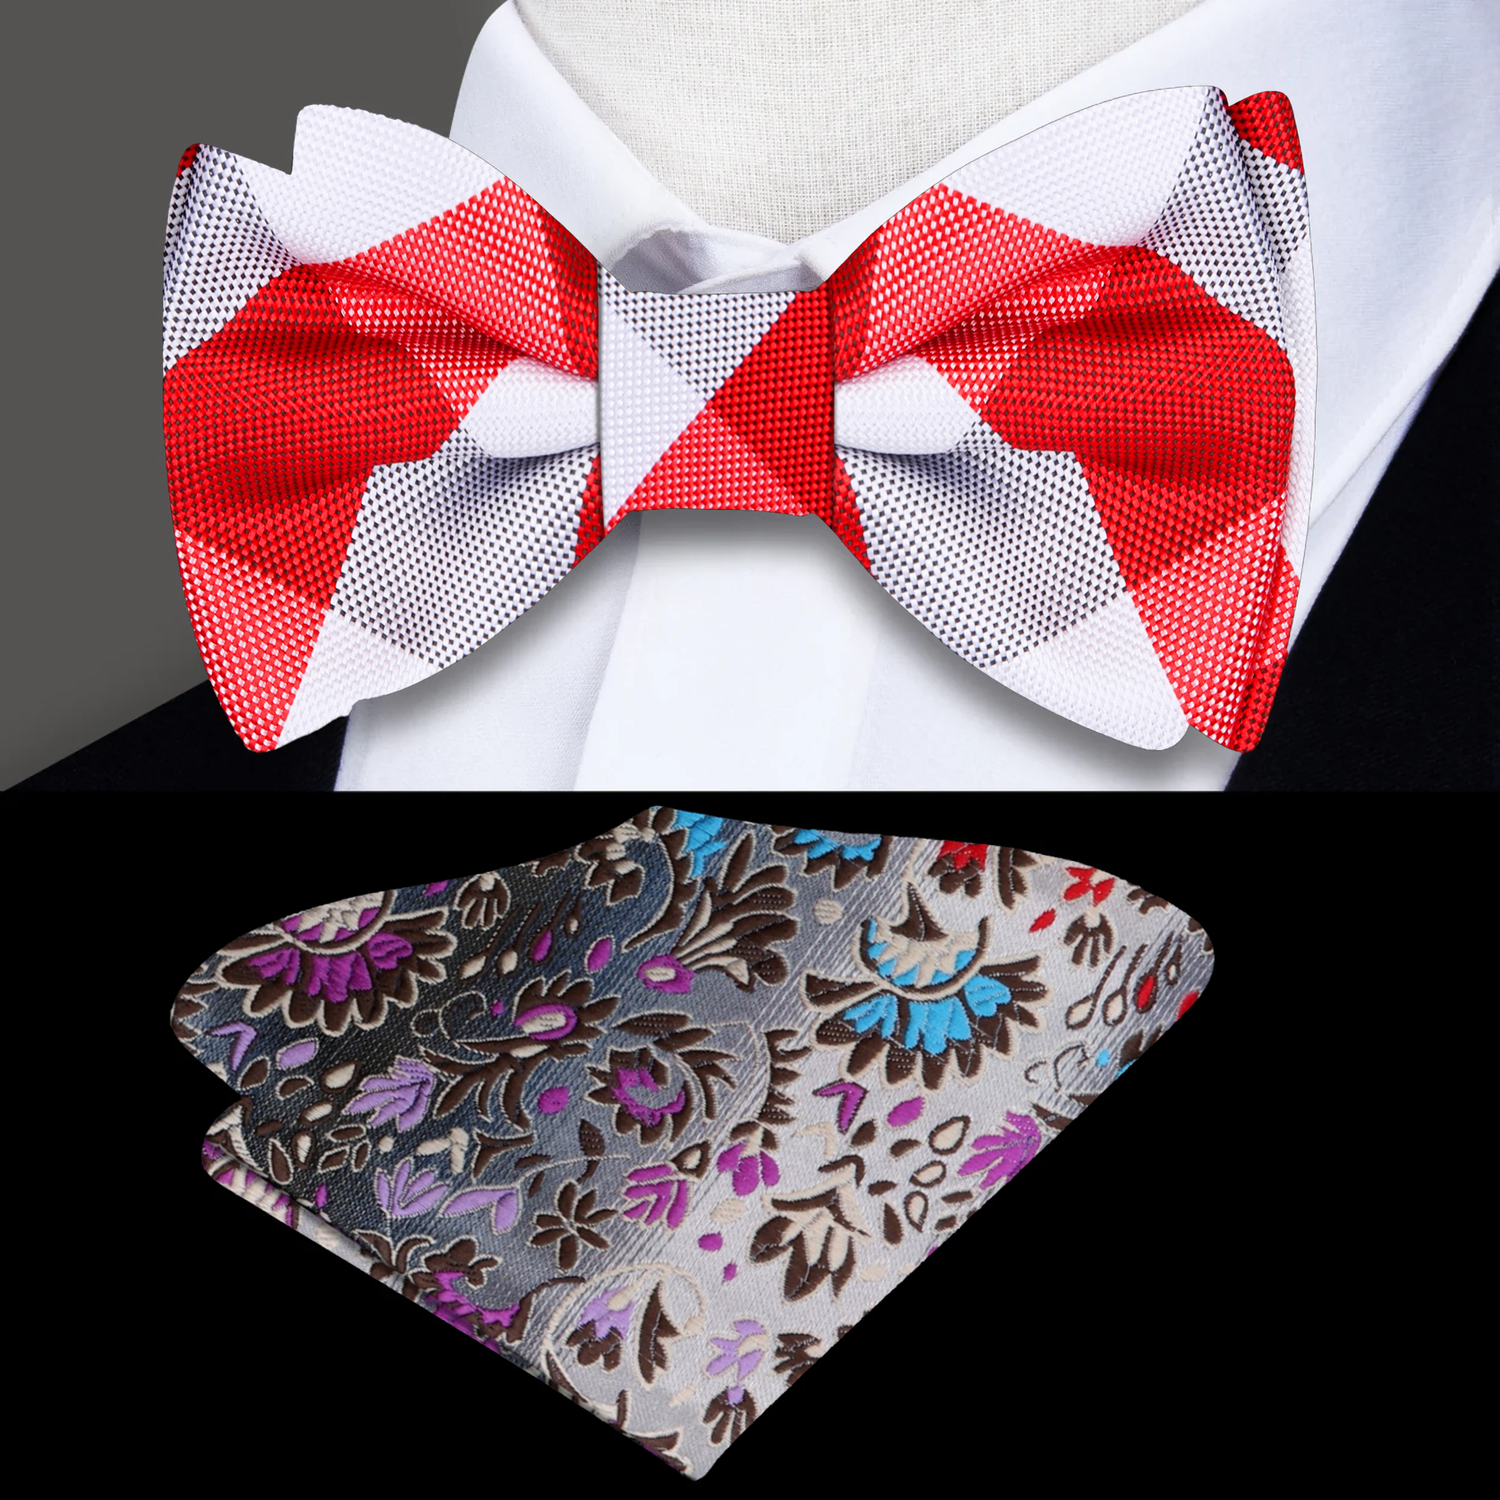 Main View: Red, White Plaid Bow Tie and Accenting Pocket Square